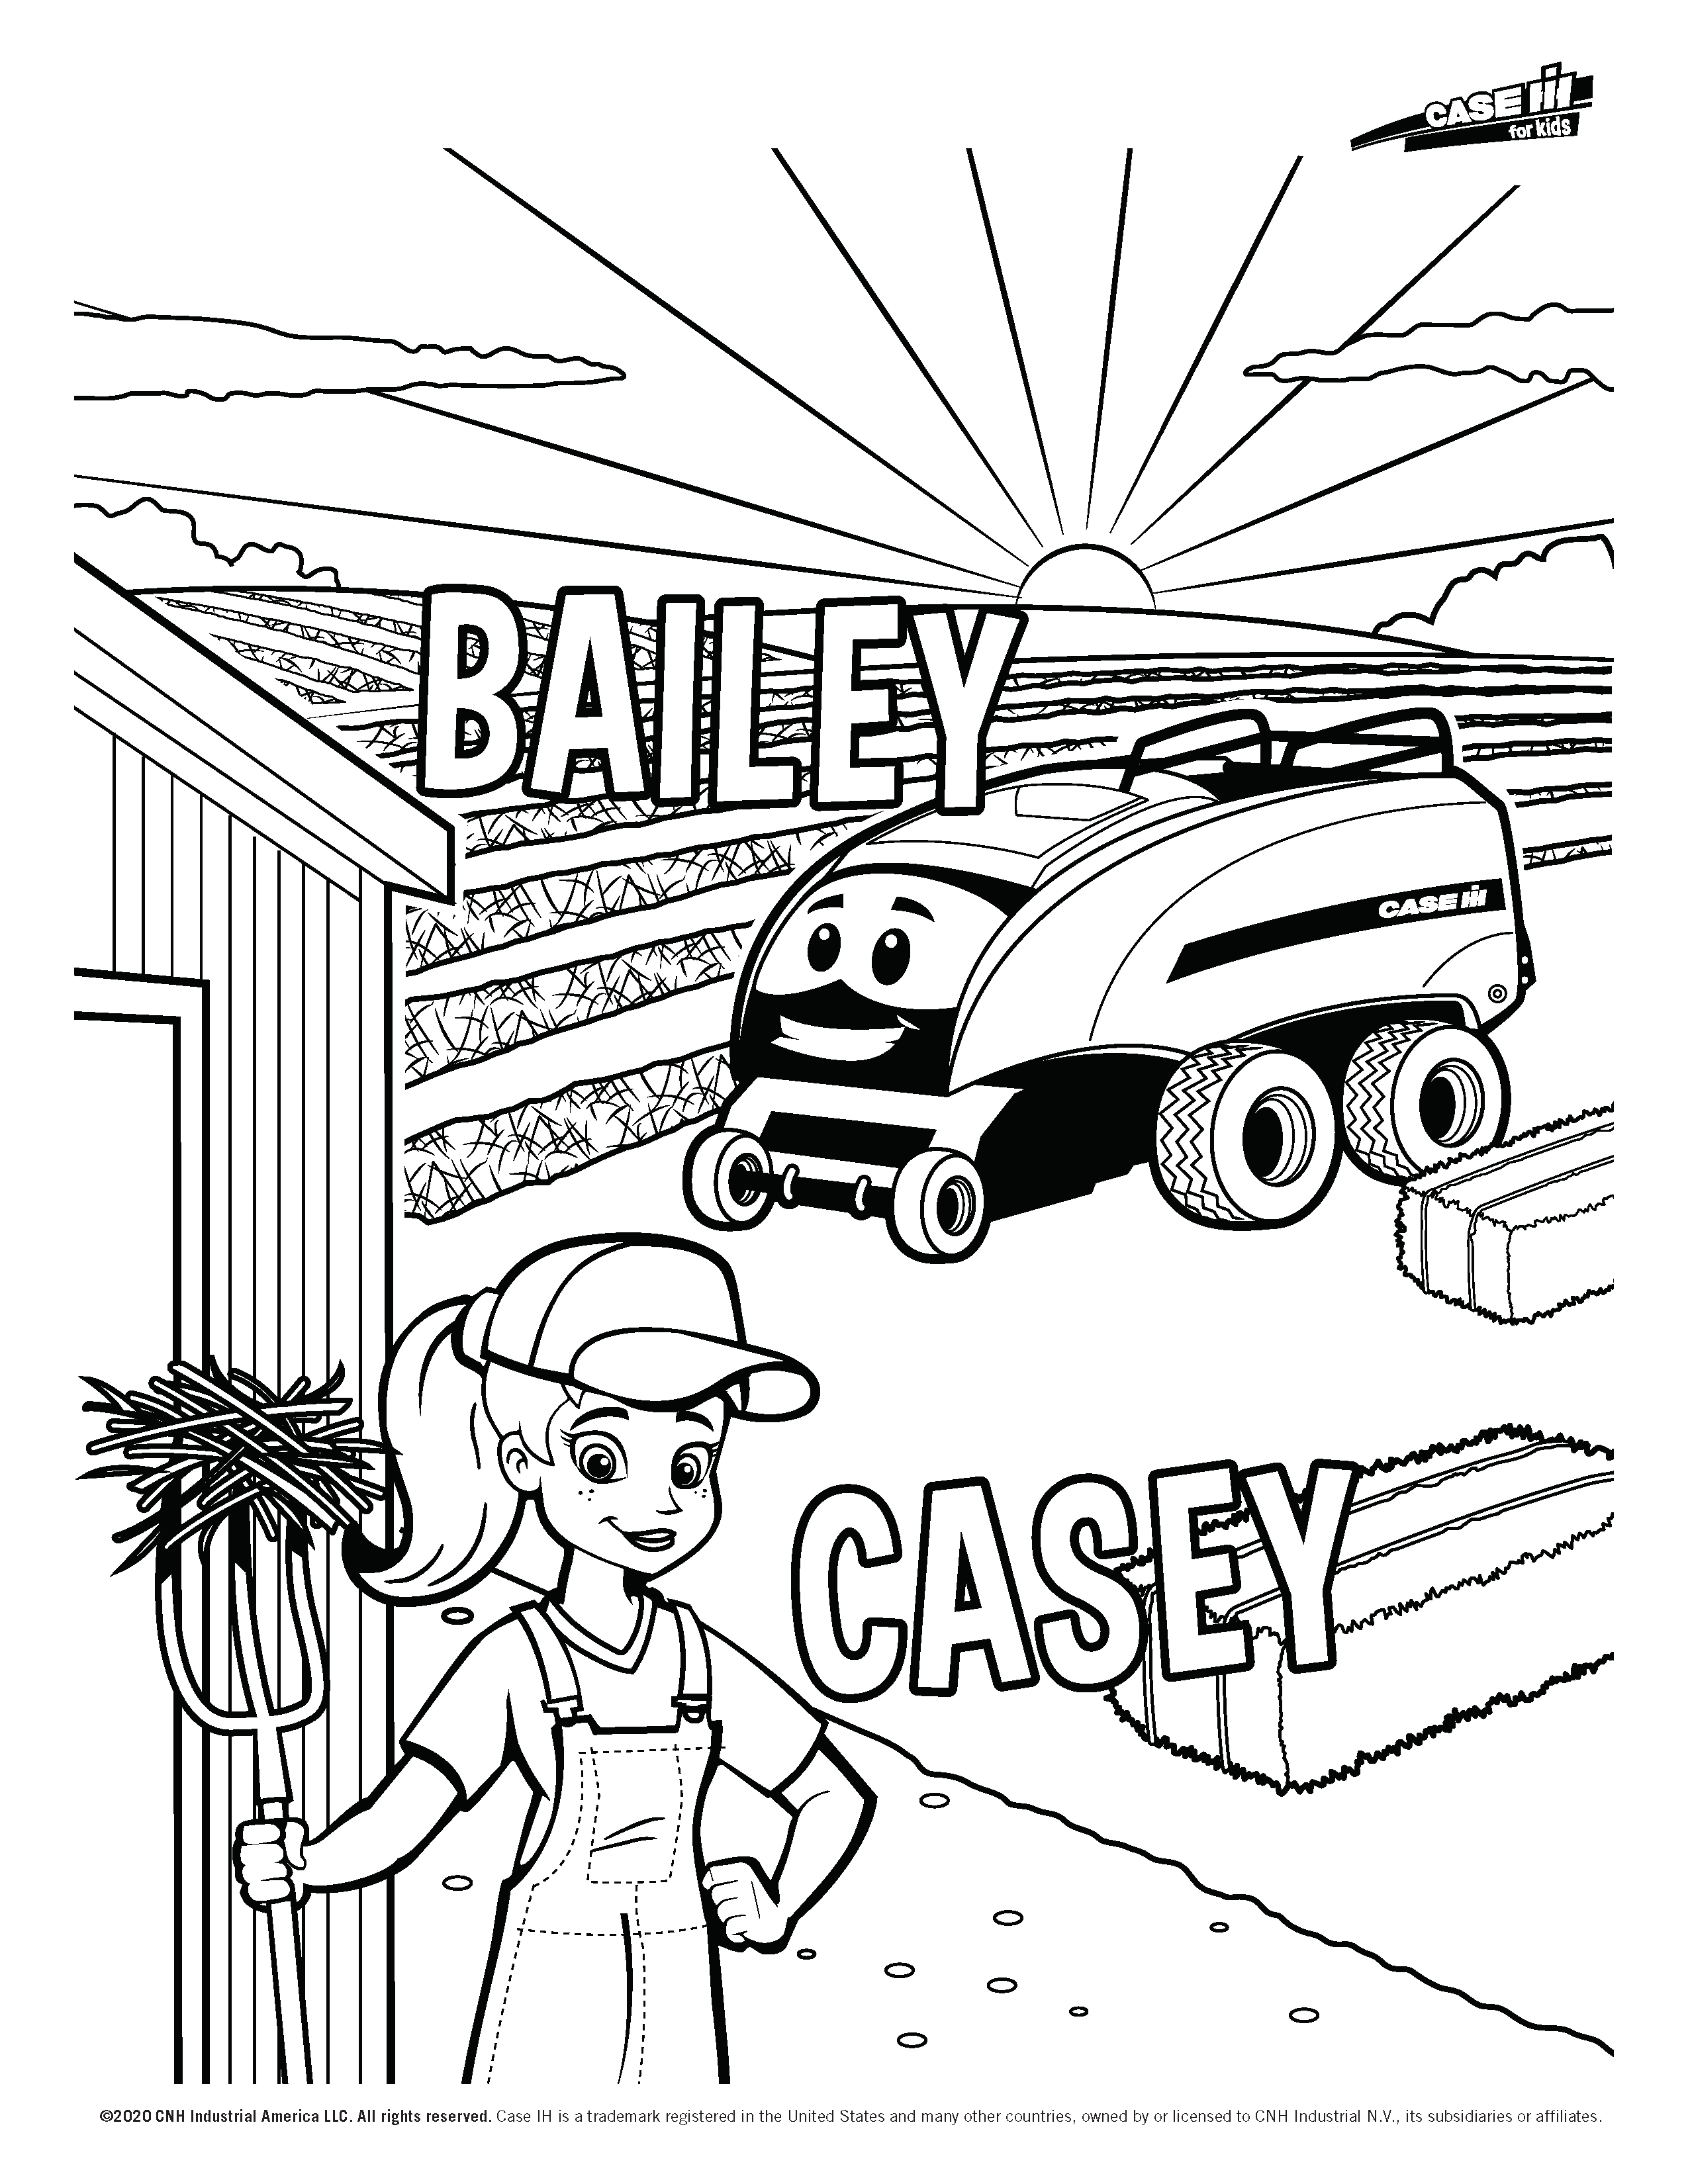 Casey and Friends_Casey_Bailey_01.png 